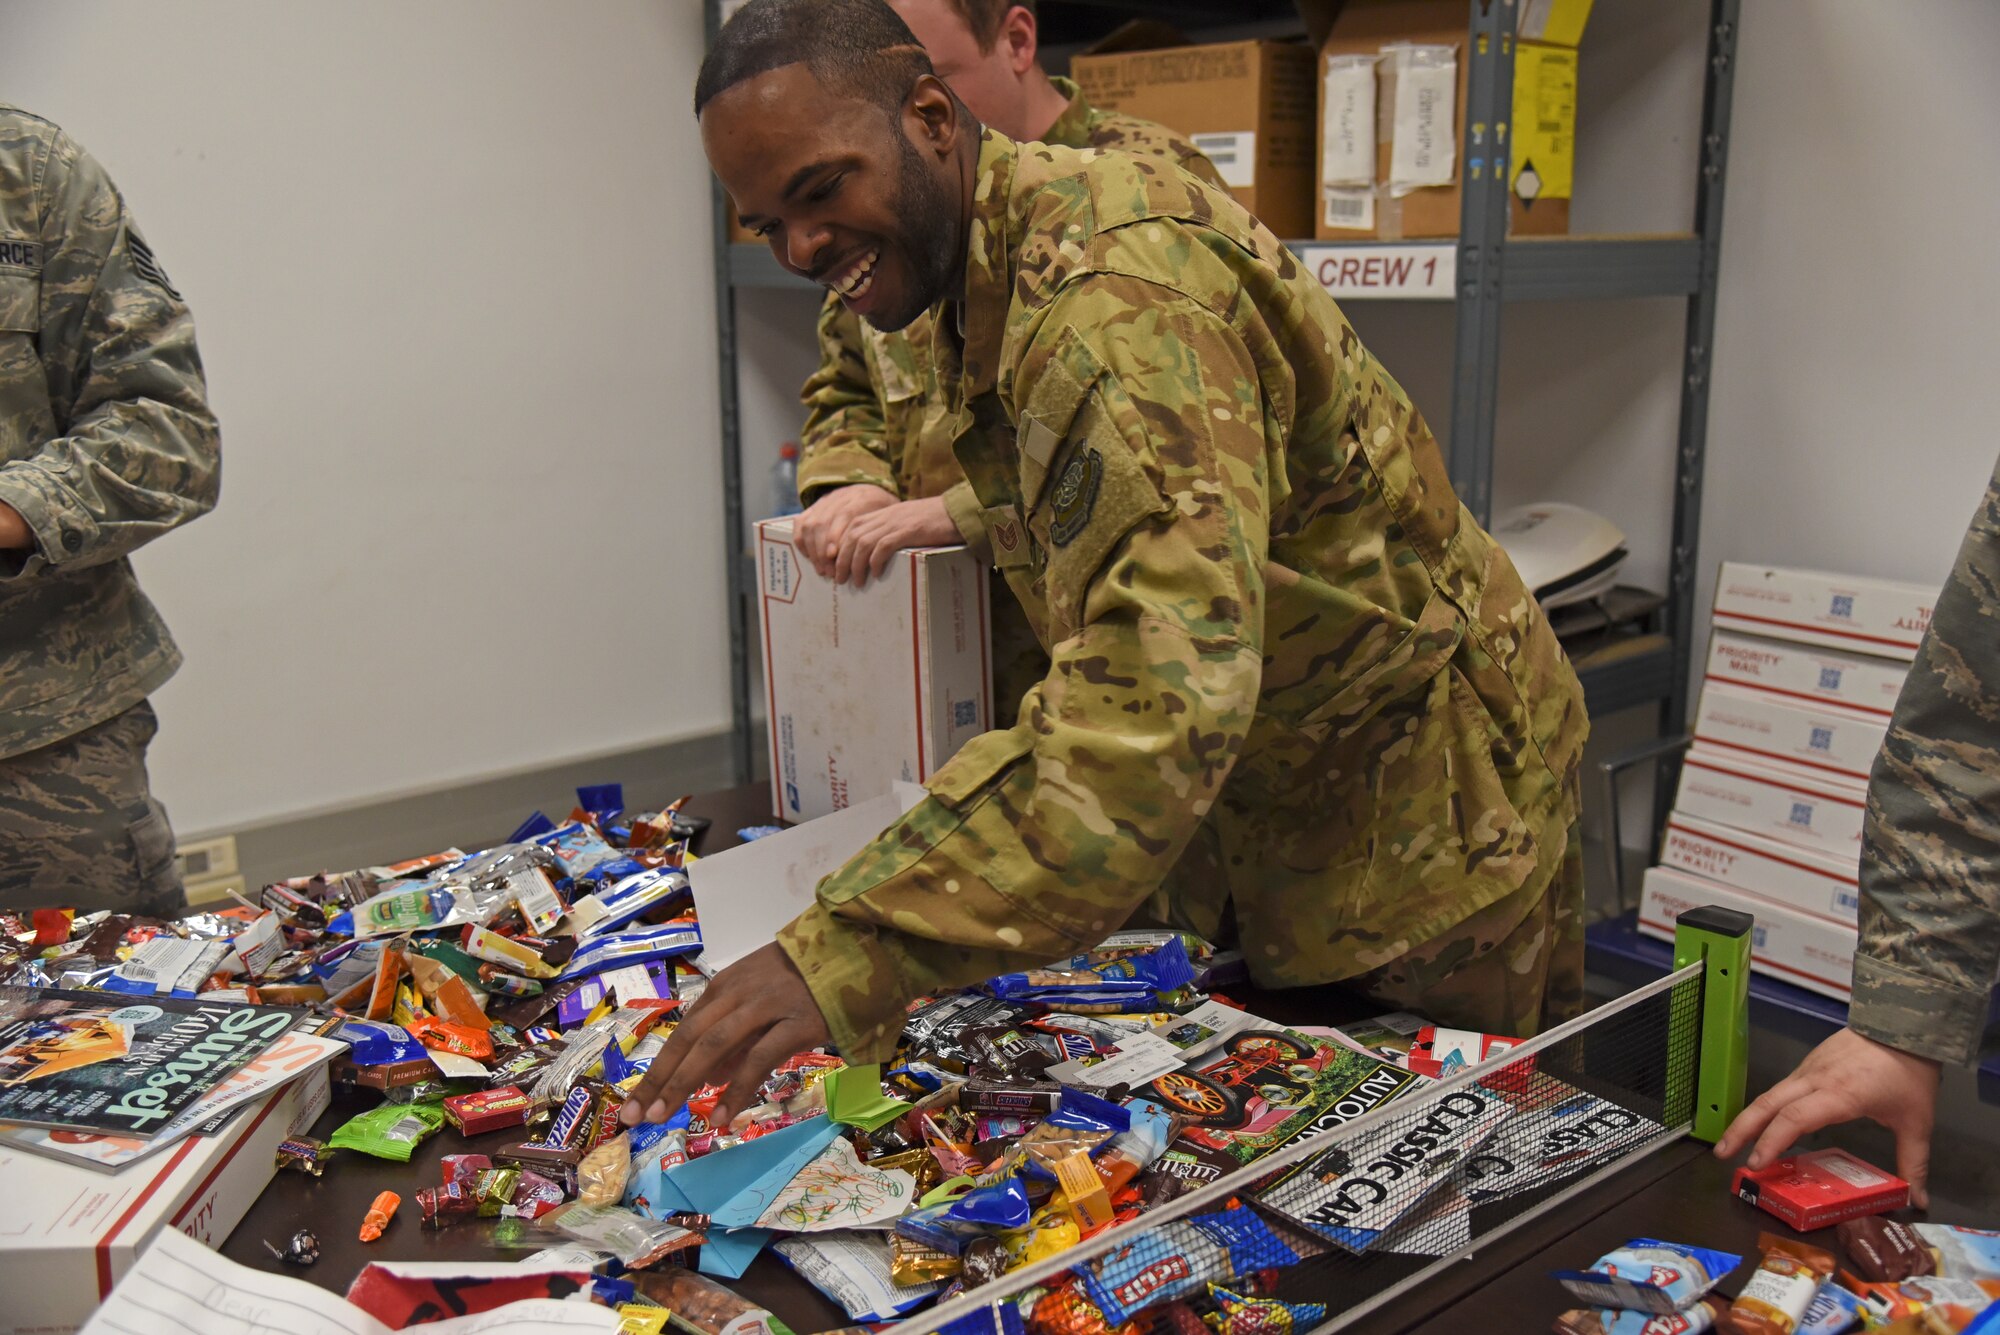 Tech. Sgt. Jonathan Rogers, 93 Air Refueling Squadron boom operator, opens a Treats 2 Troops care package Dec. 4, 2018, at Morón Air Base, Spain. For over a month leading up to the annual Treats 2 Troops packing event at Fairchild Air Force Base, Washington, thousands of items are collected from the Inland Northwest Community including candy, snacks, lip balm, office supplies and toiletries. Local schools in the area also contribute to the creation of care packages by making handmade holiday cards. (U.S. Air Force photo/Staff Sgt. Mackenzie Mendez)